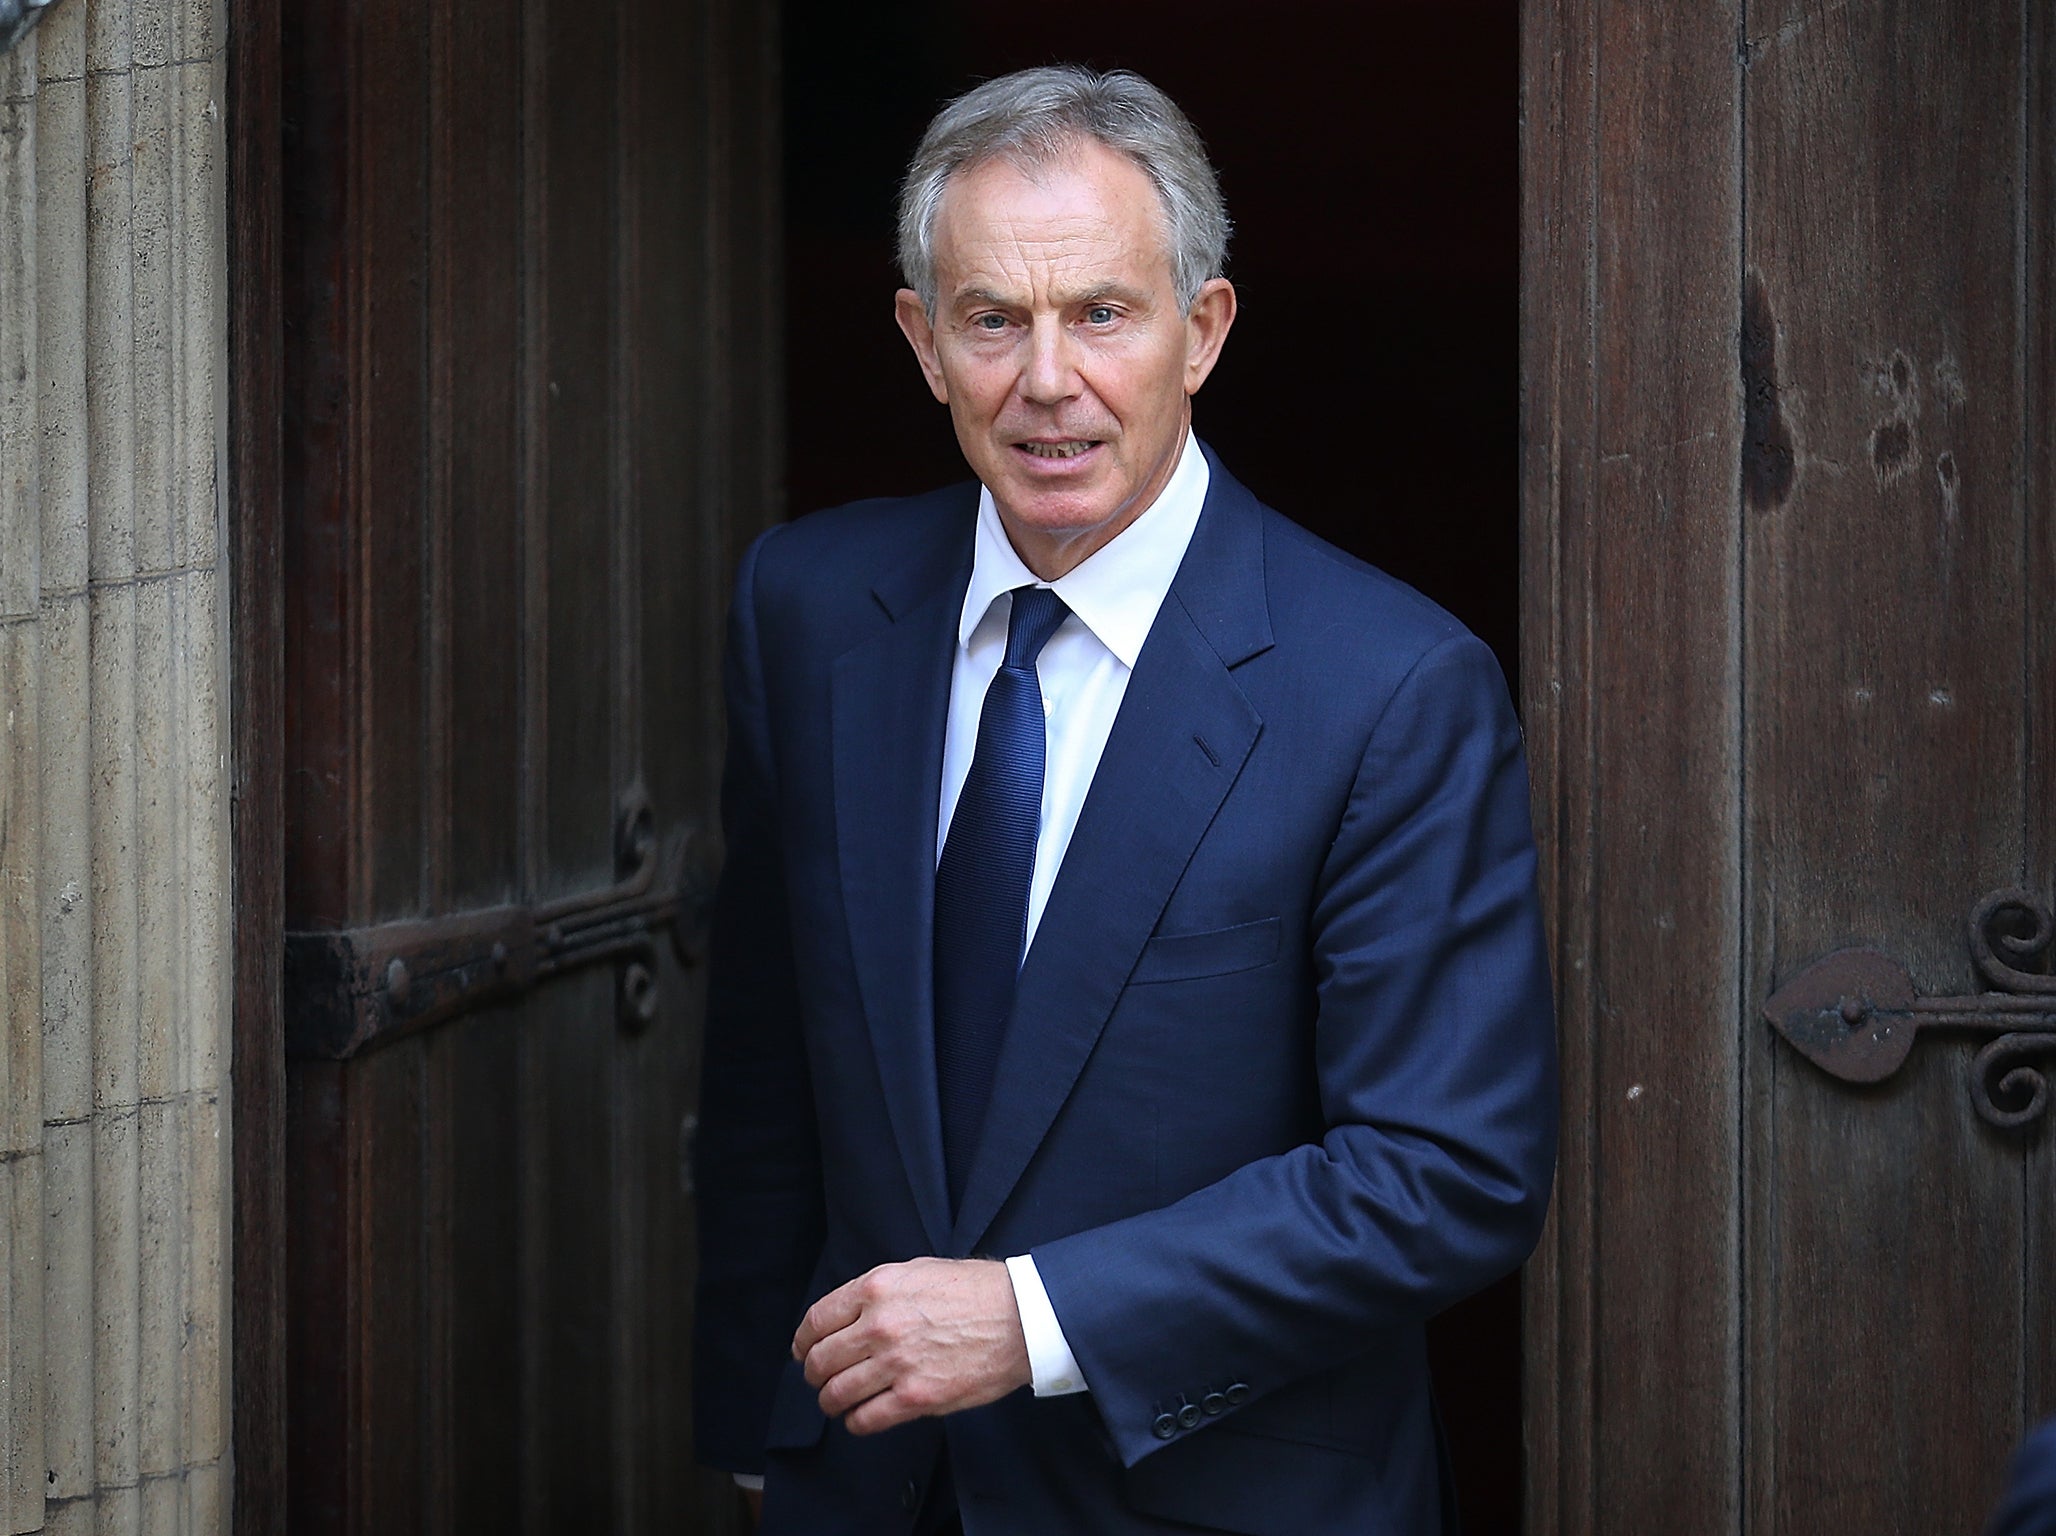 Tony Blair said the people have the right to vote on the terms of any Brexit deal either via referendum or general election